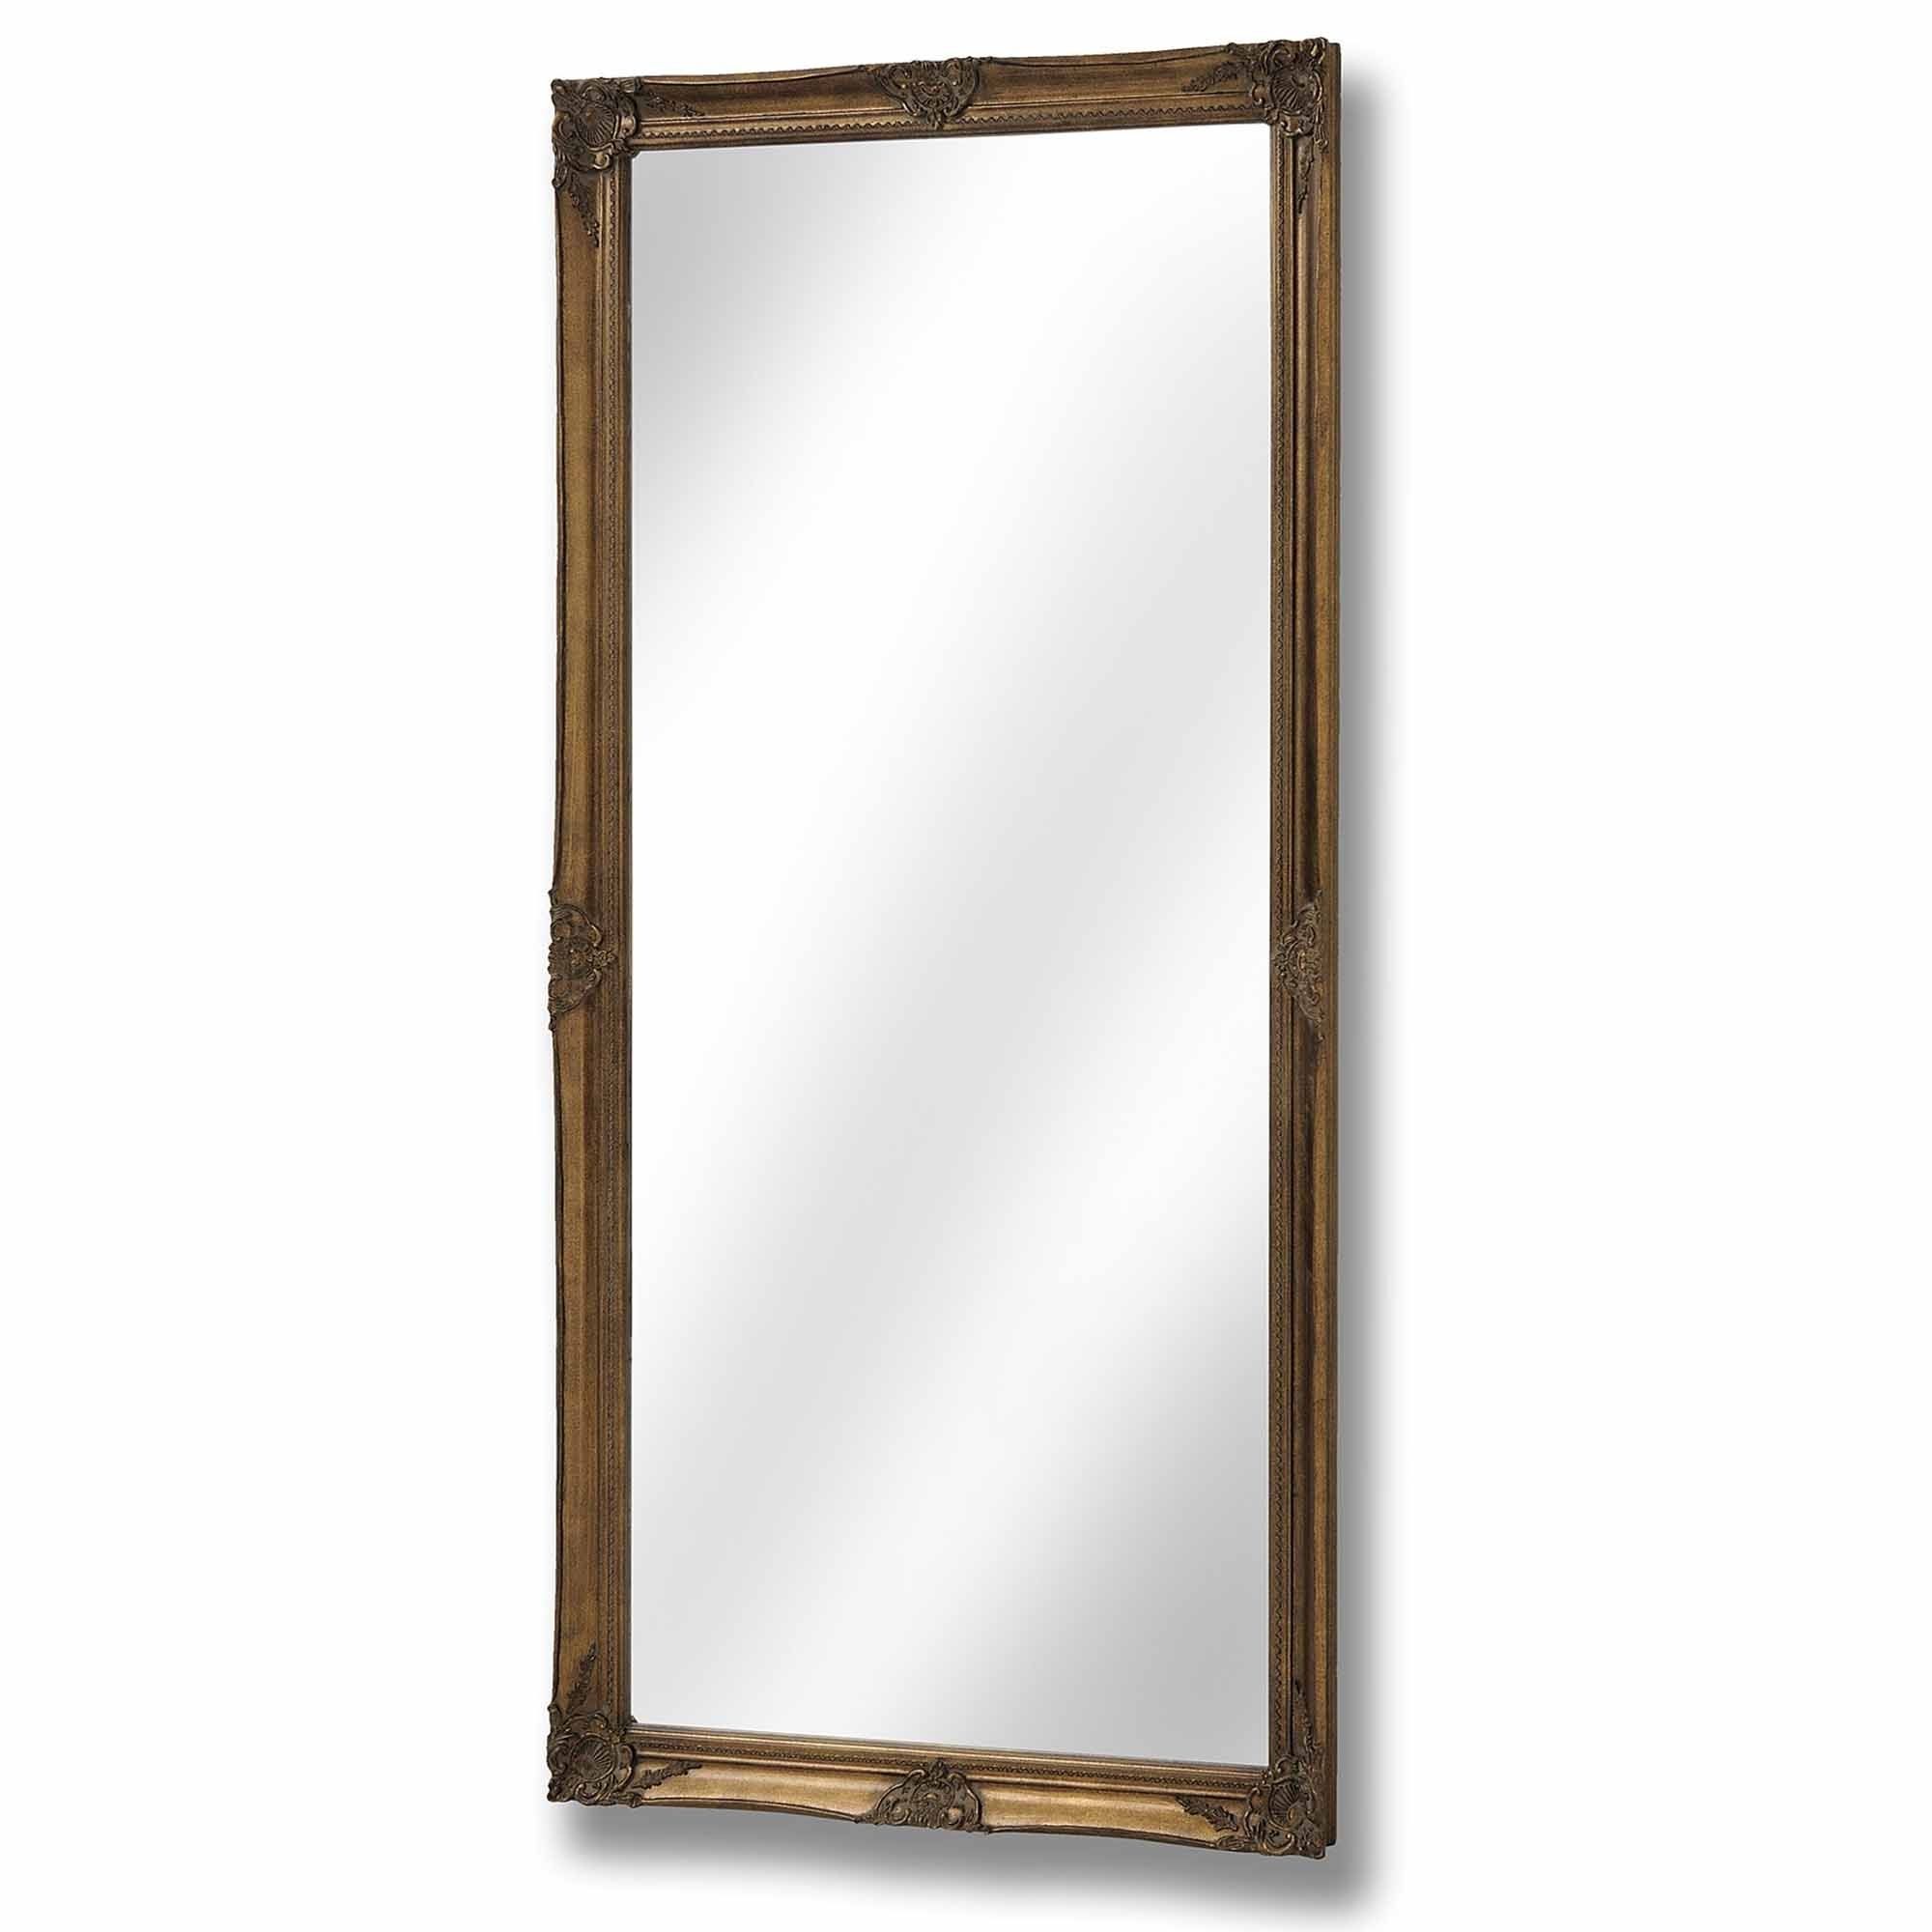 Large Rectangular Antique French Style Gold Mirror | Homesdirect365 Regarding Warm Gold Rectangular Wall Mirrors (View 15 of 15)